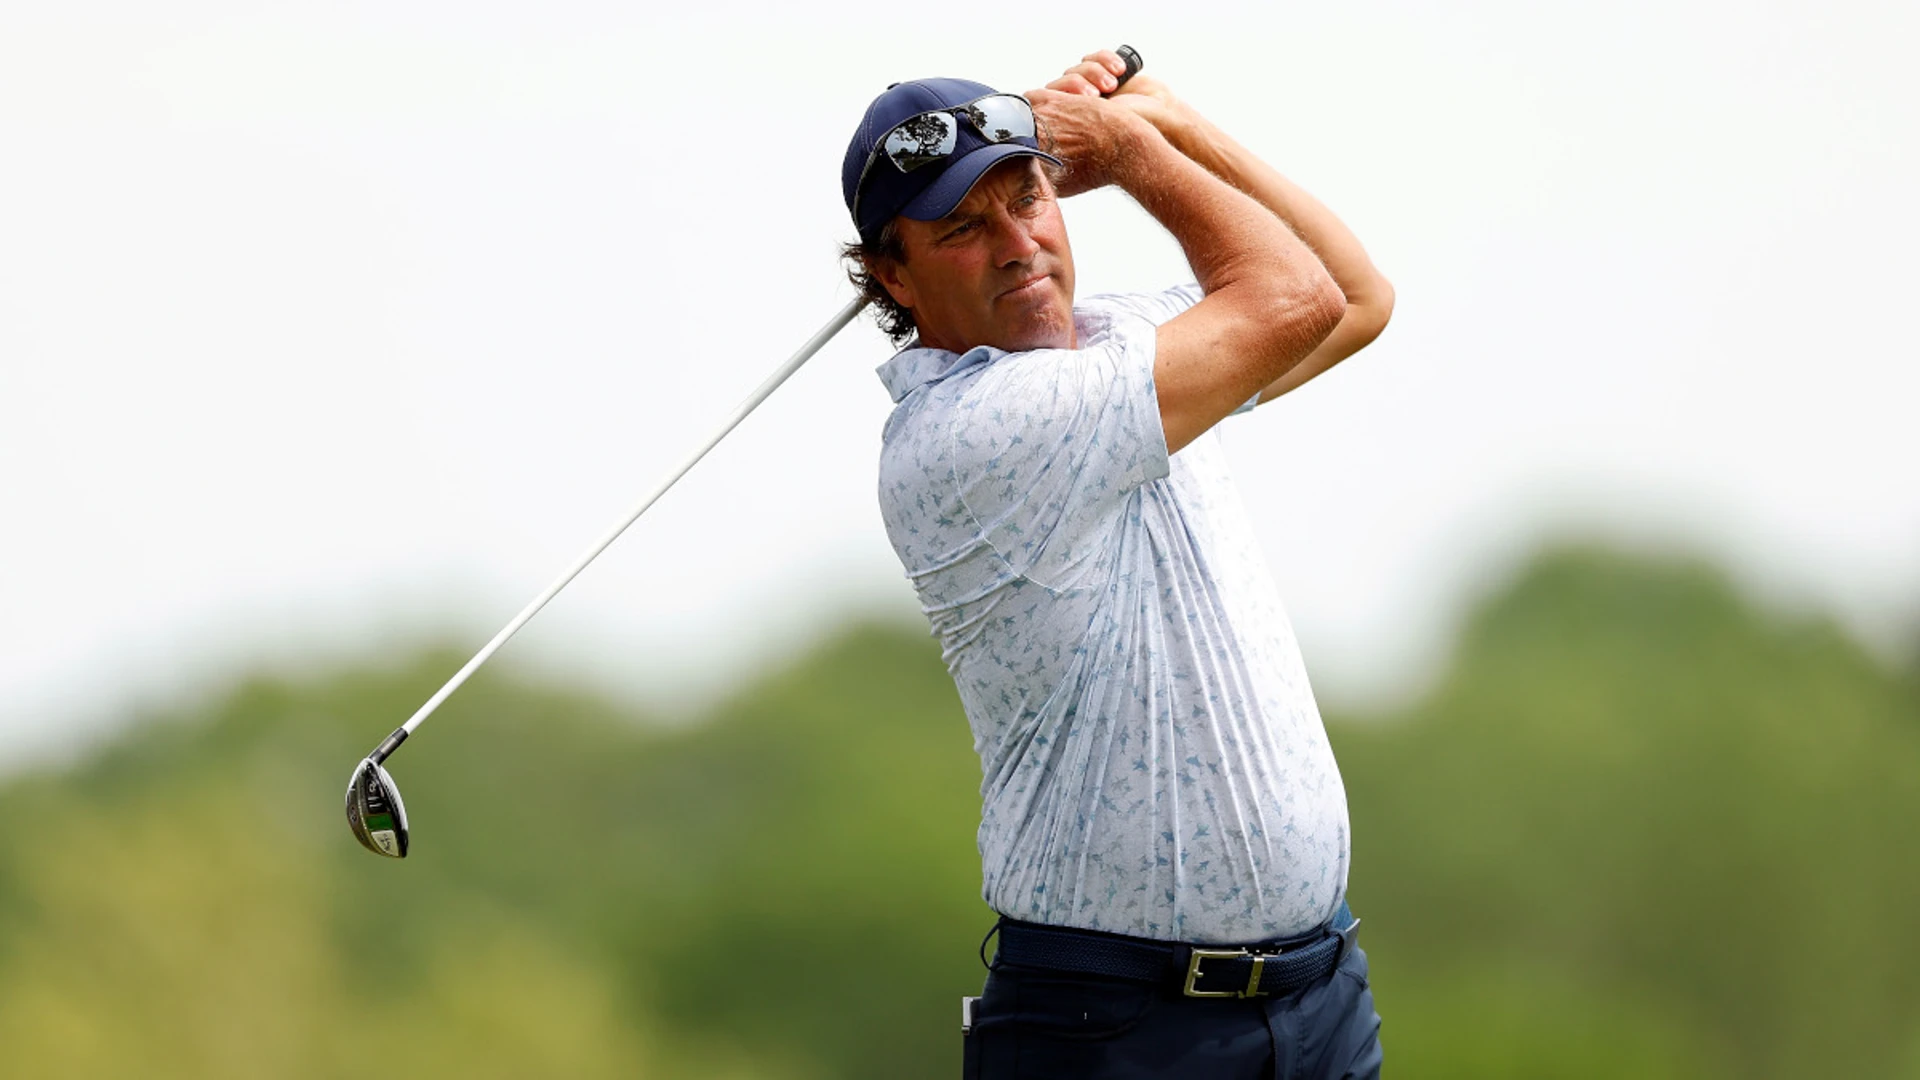 Stephen Ames takes early edge at Dick's Open